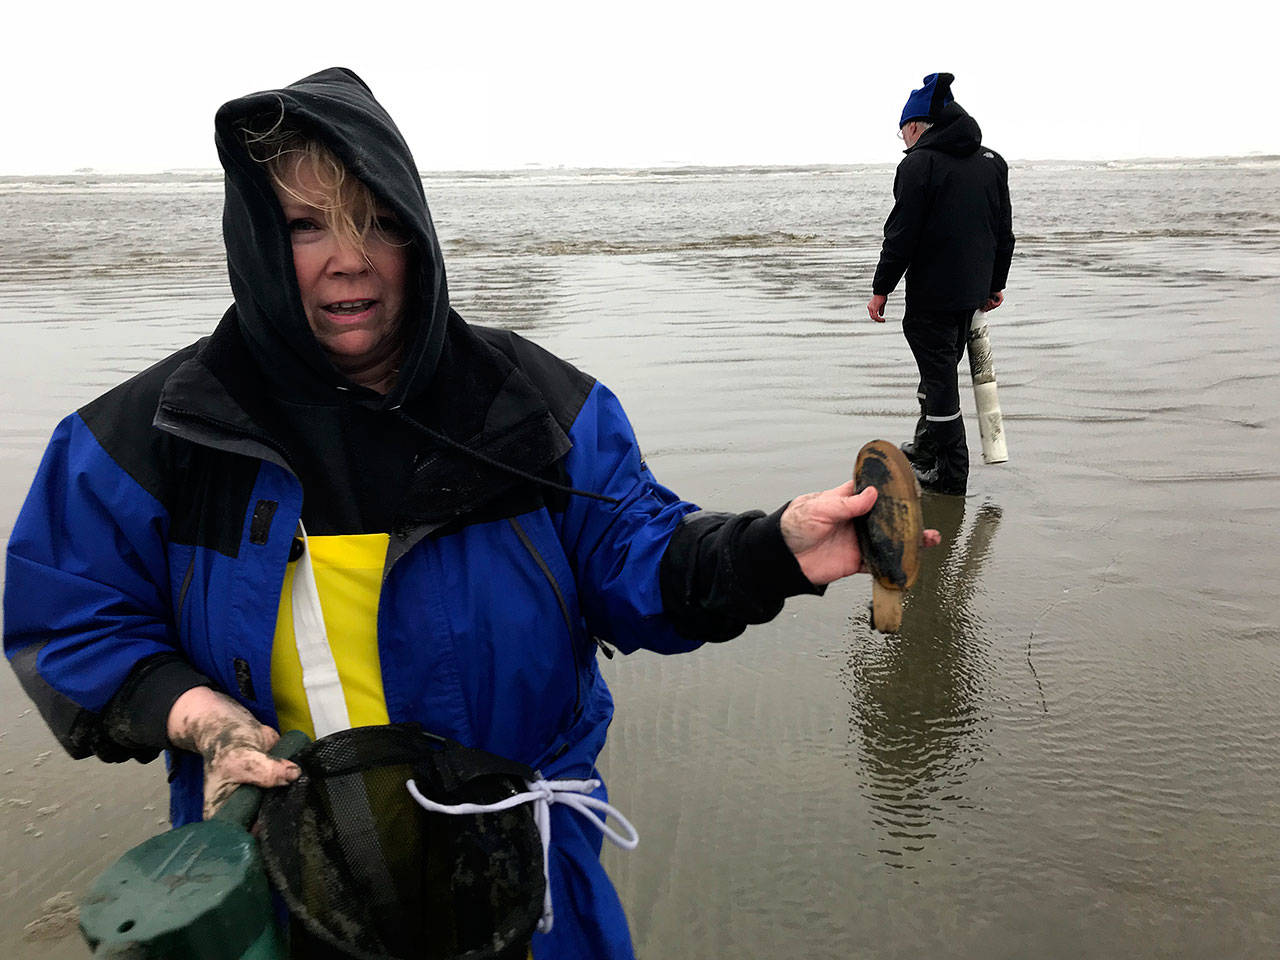 Photos from the razor clam dig on the coast